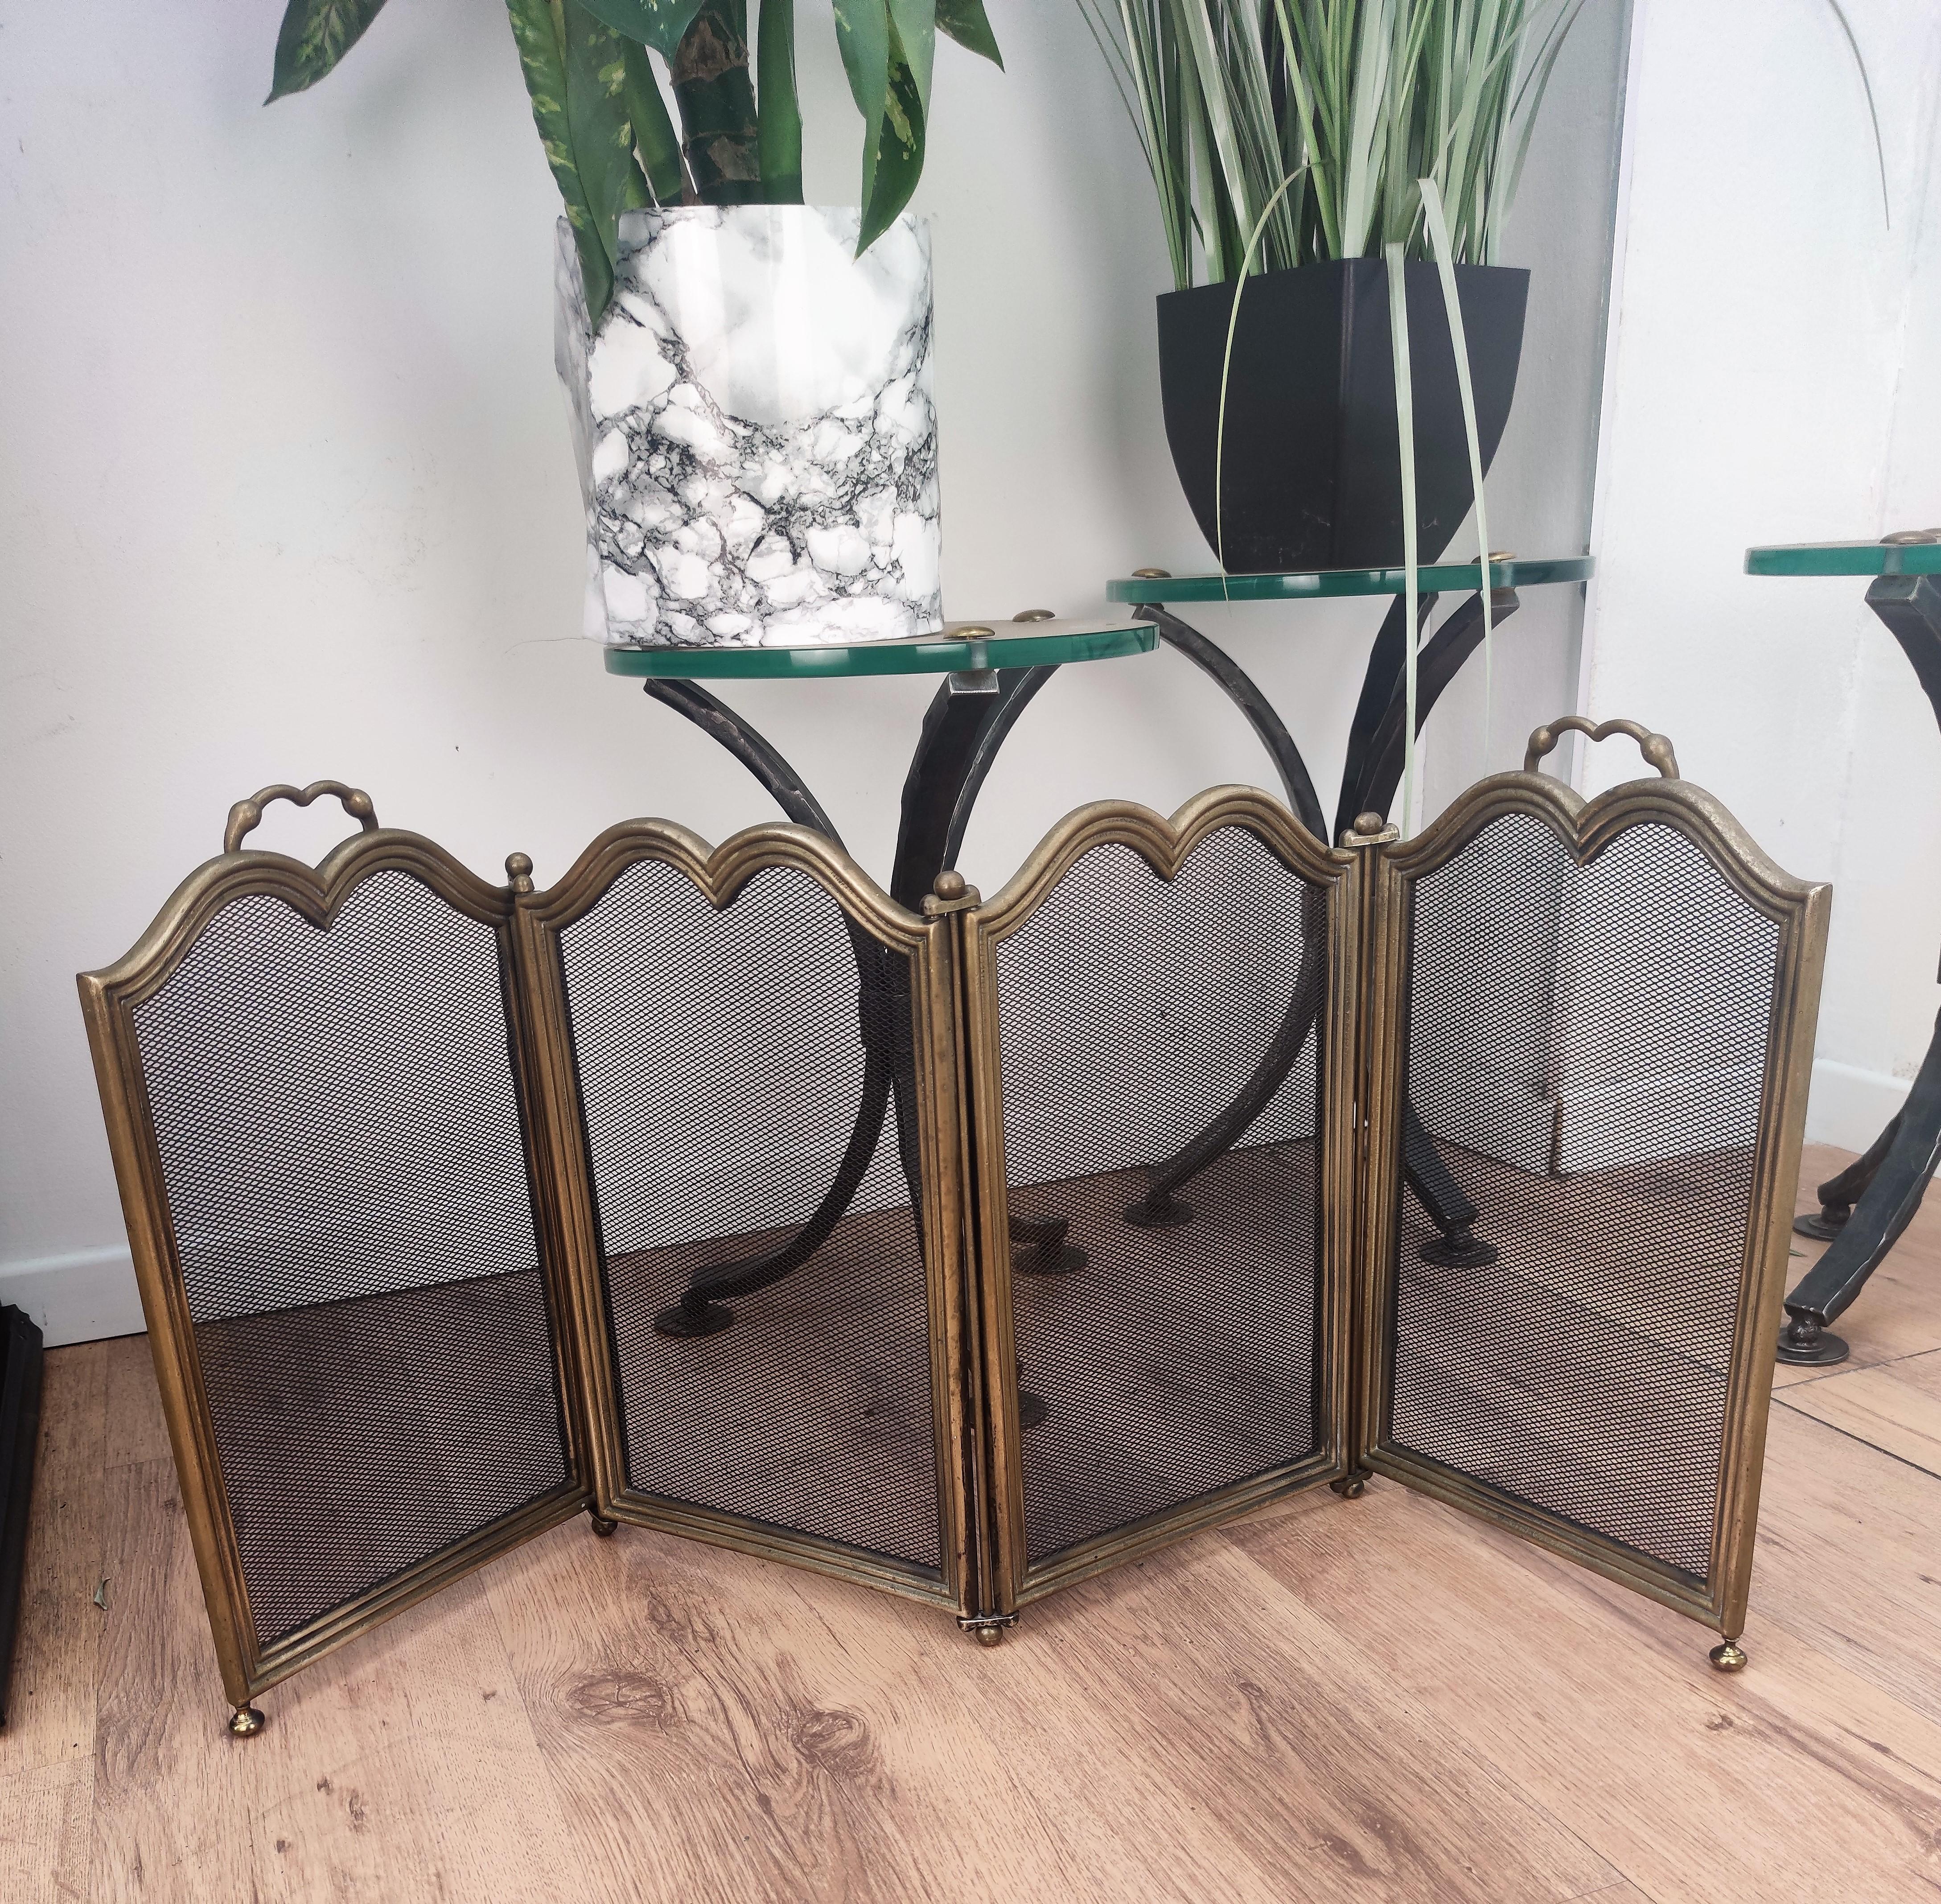 Italian gilt brass foldable fireplace screen or fire screen. Nice decorative piece, this 4 piece screen is easy to tow and use, the pieces can be easily folded to adapt and work with any size opening. Overall very decorative piece in nice